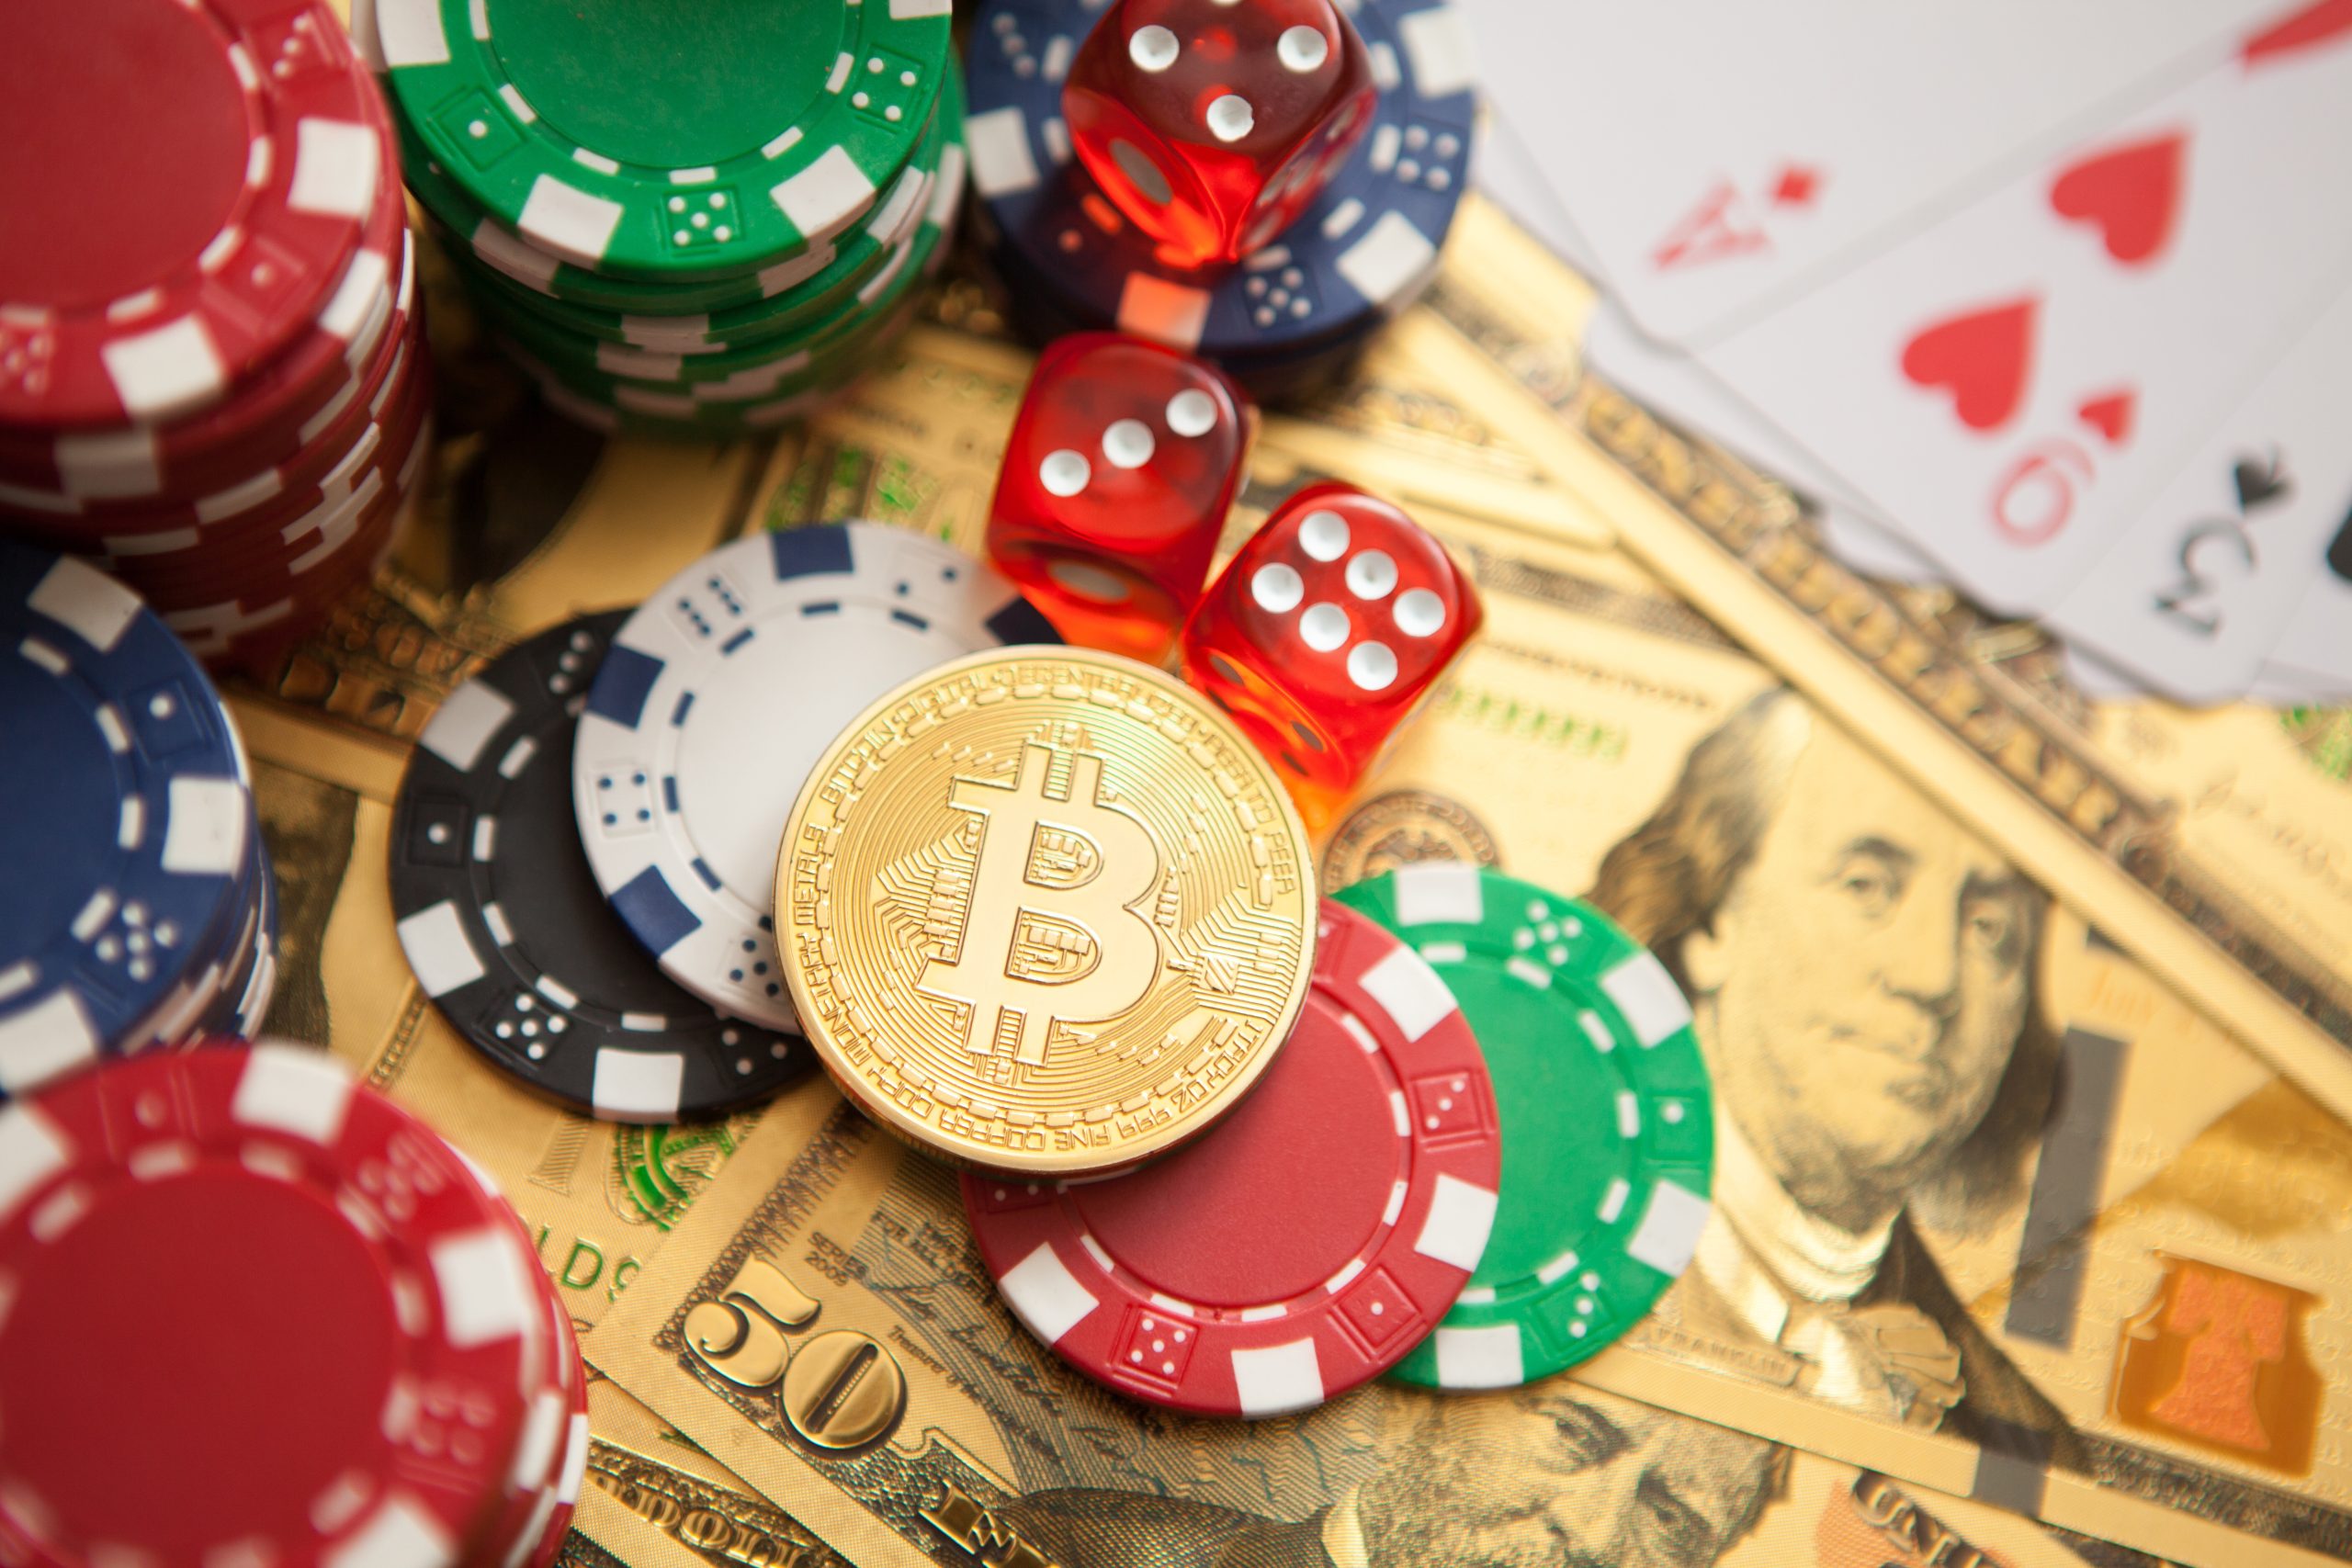 How To Turn best bitcoin casino Into Success